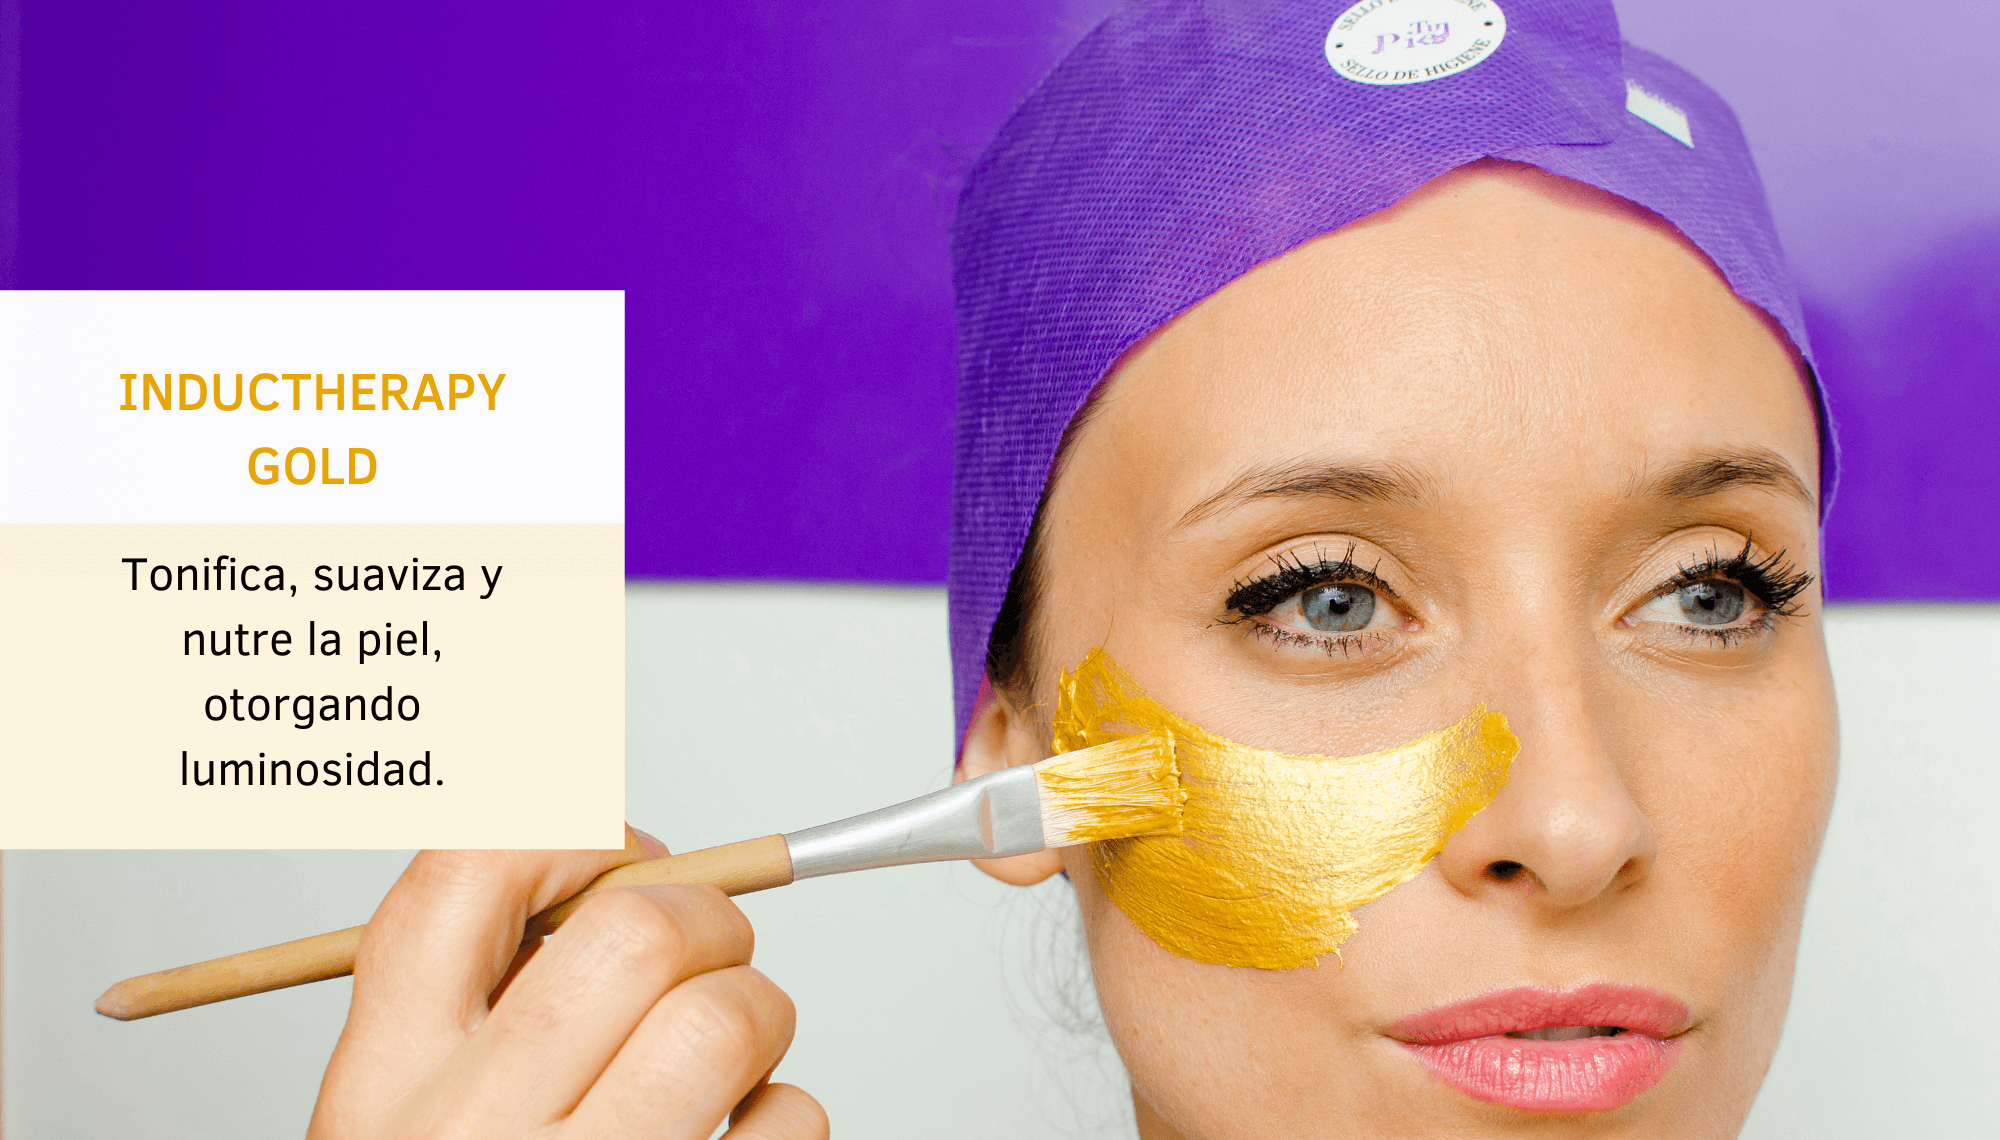 Facial Inductherapy Gold